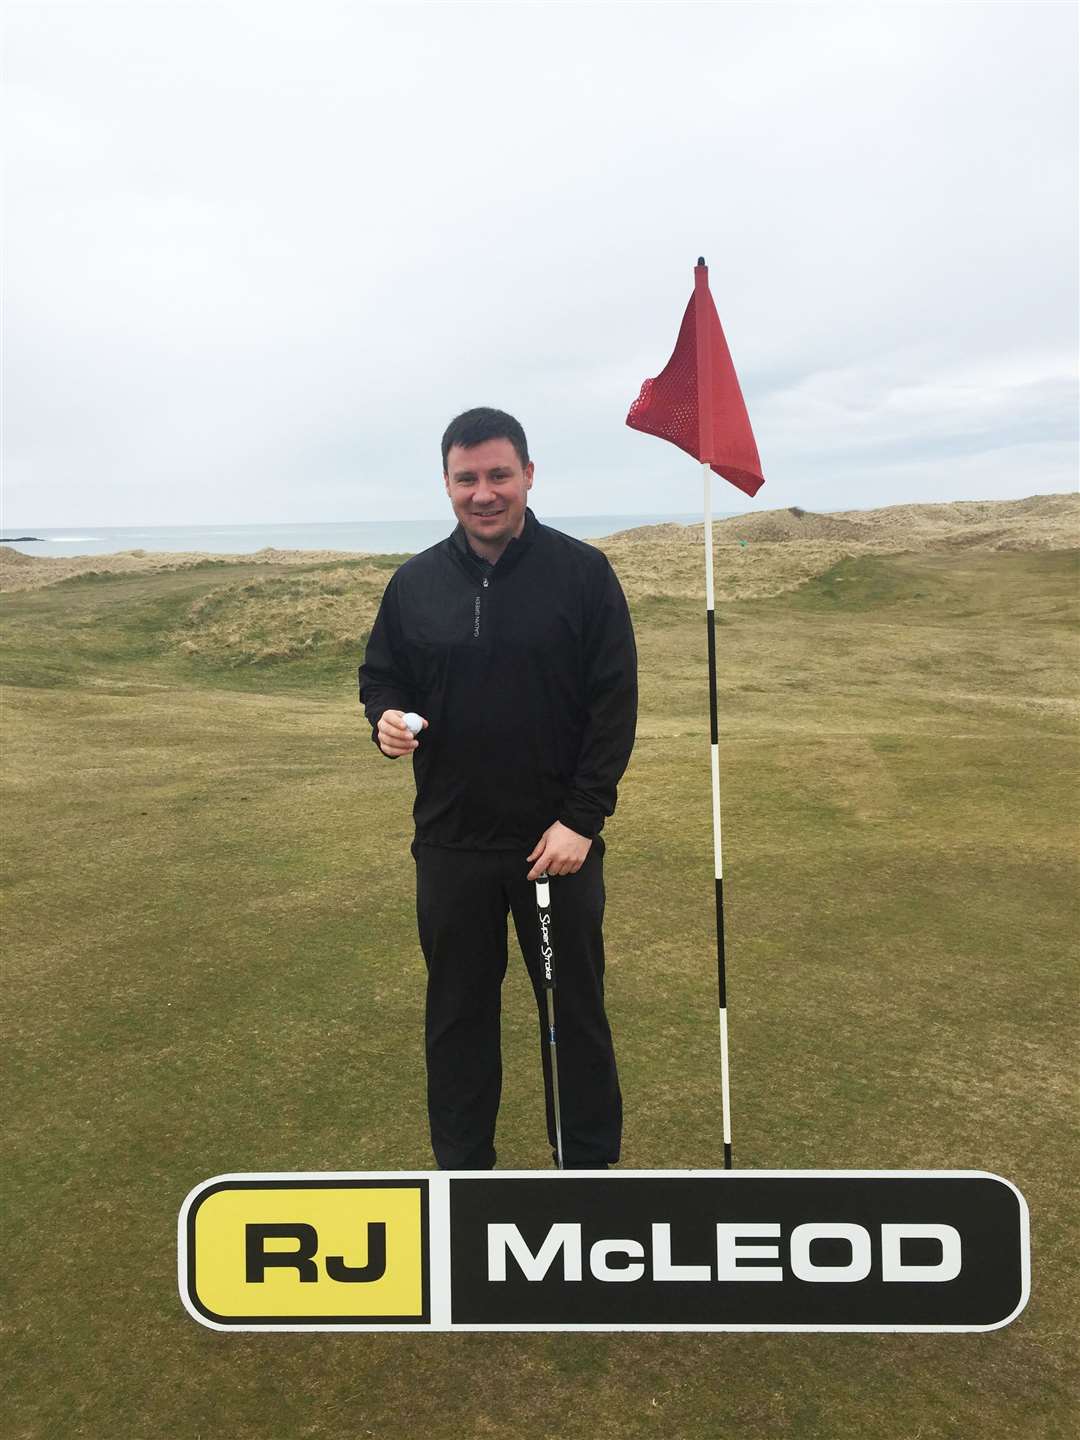 Michael Smith who recorded a hole in one at the 18th during Reay's Texas Scramble sponsored by RJ McLeod.